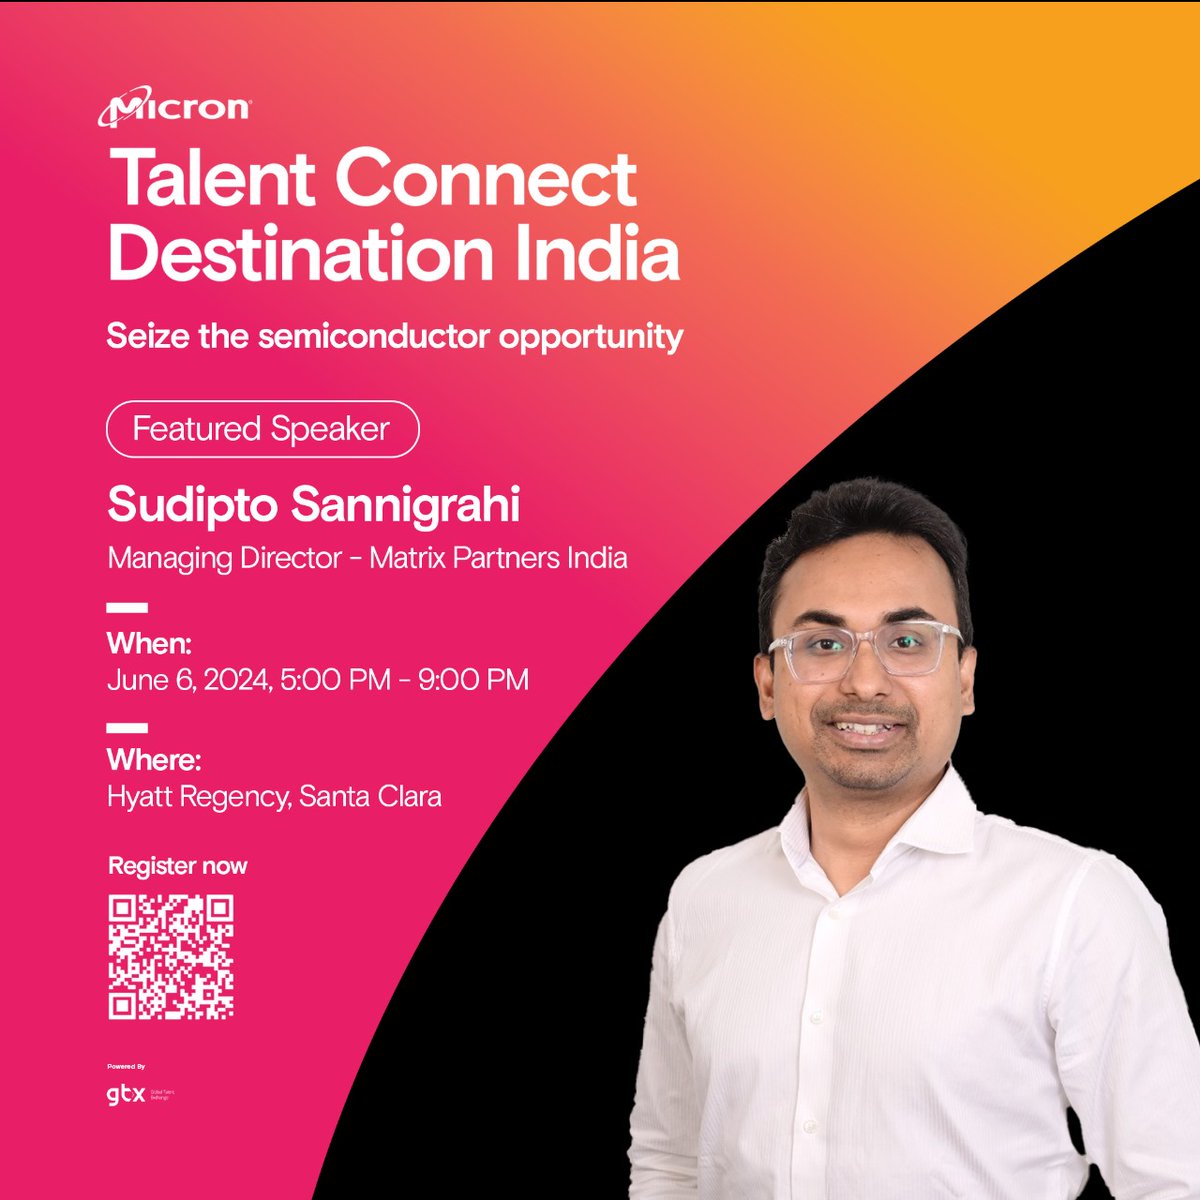 Thrilled to announce that Sudipto Sannigrahi, MD at @matrixindiavc, will be joining us at the Micron Talent Connect - Destination India event this June in Santa Clara! @sannigrahis @MicronTech Grab the chance to meet the leader himself 🔗#Register now! microntalentconnect.globaltalex.com